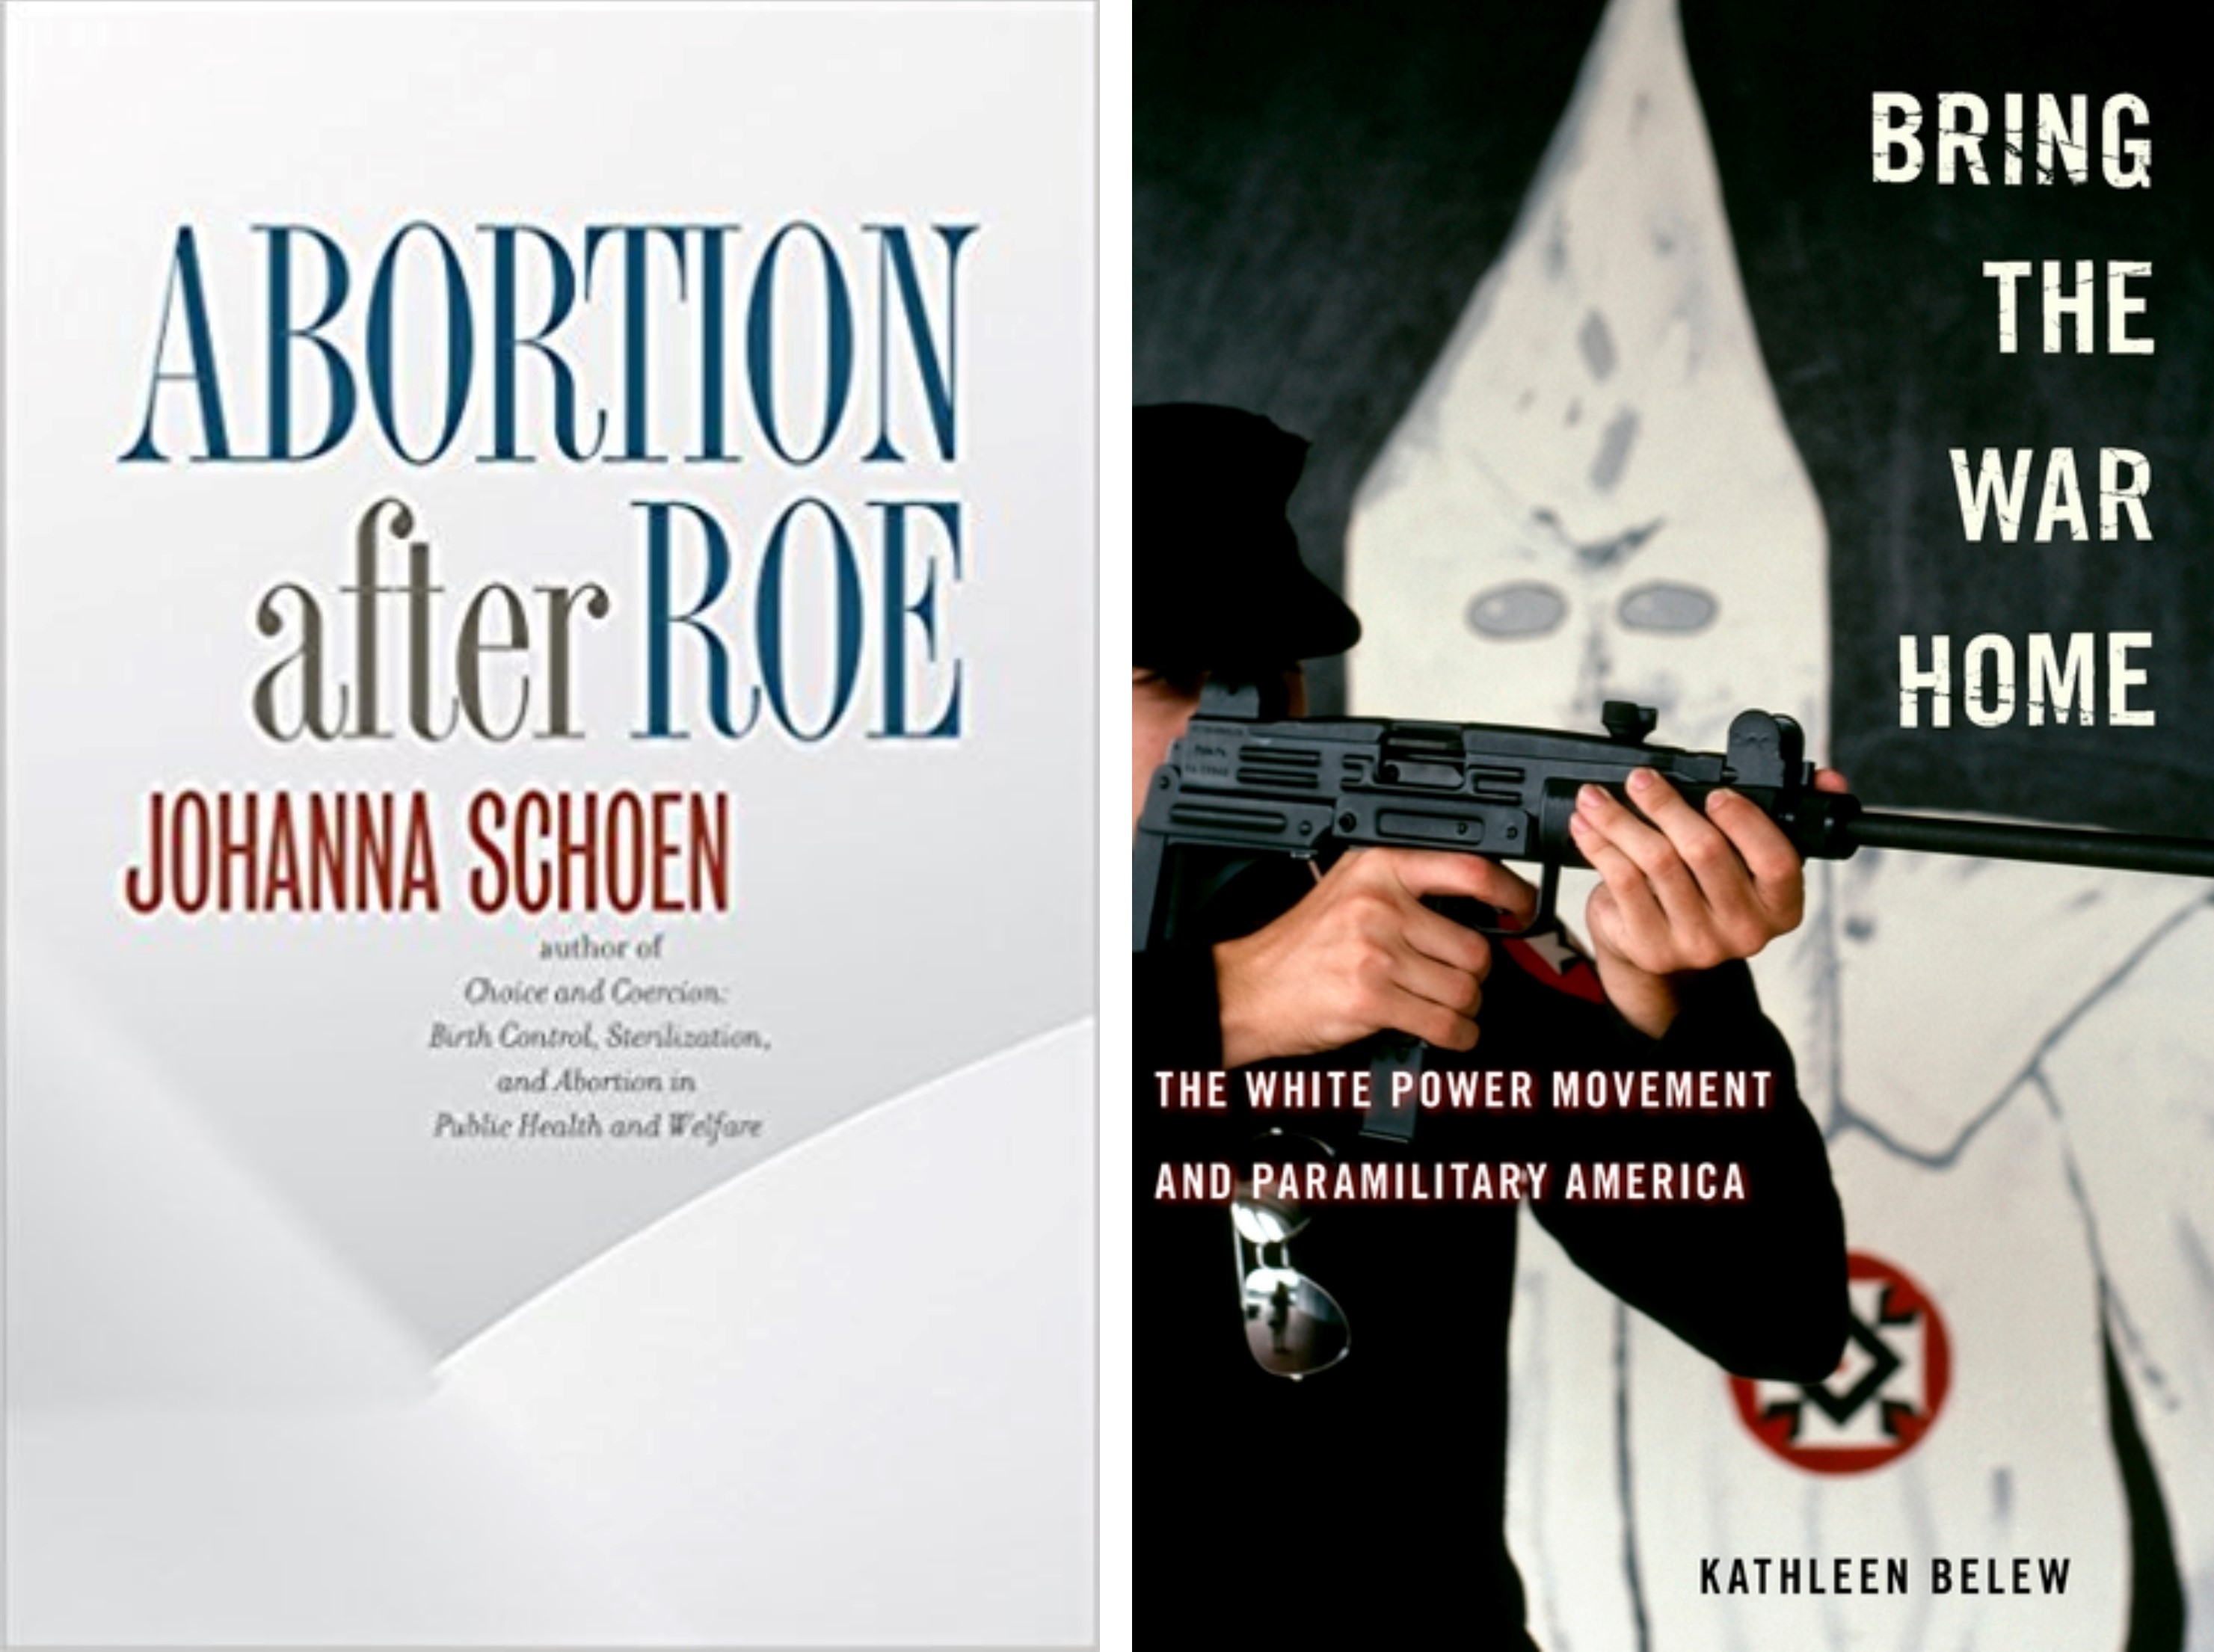 On the left, the cover of 'Abortion after Roe." On the right, the cover of 'Bring the War Home.'